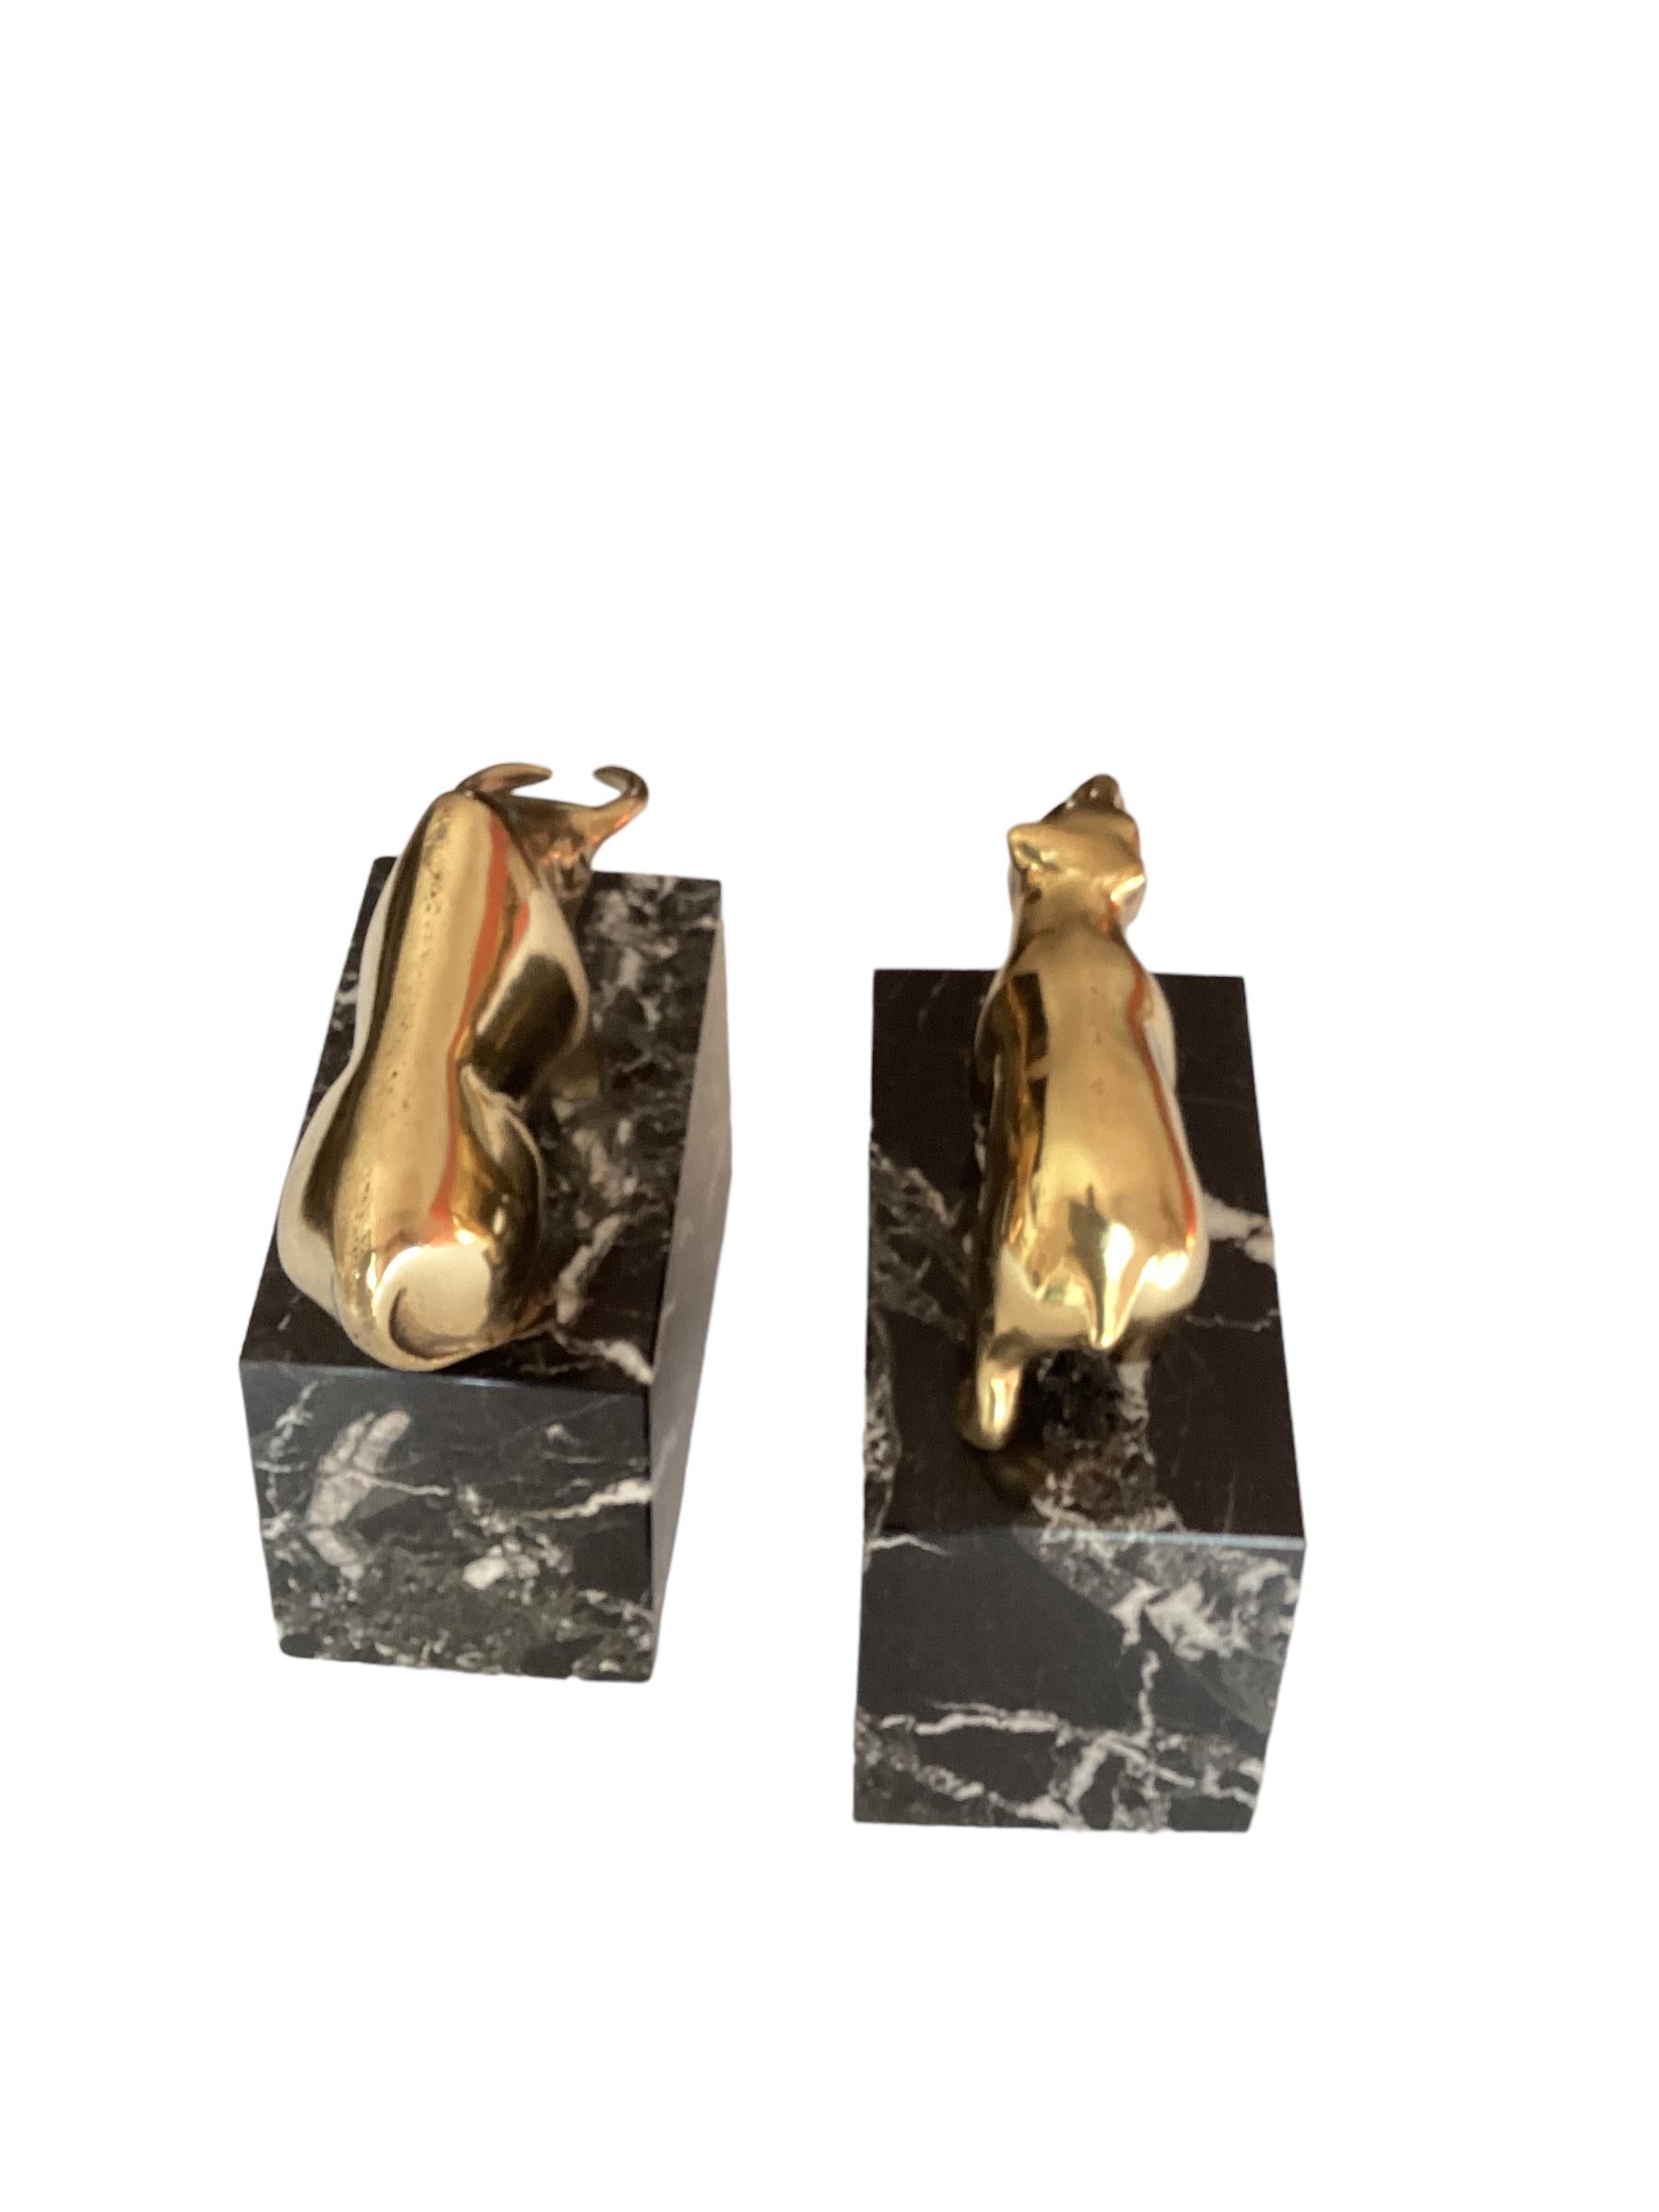 Vintage Mid Century brass bull and bear bookends, paperweights or bookends. These polished Heavy cast brass bull and bear bookends animals are mounted on black veined marble base. Fabulous Mid-Century Modern meets Art Deco style, sure to add some